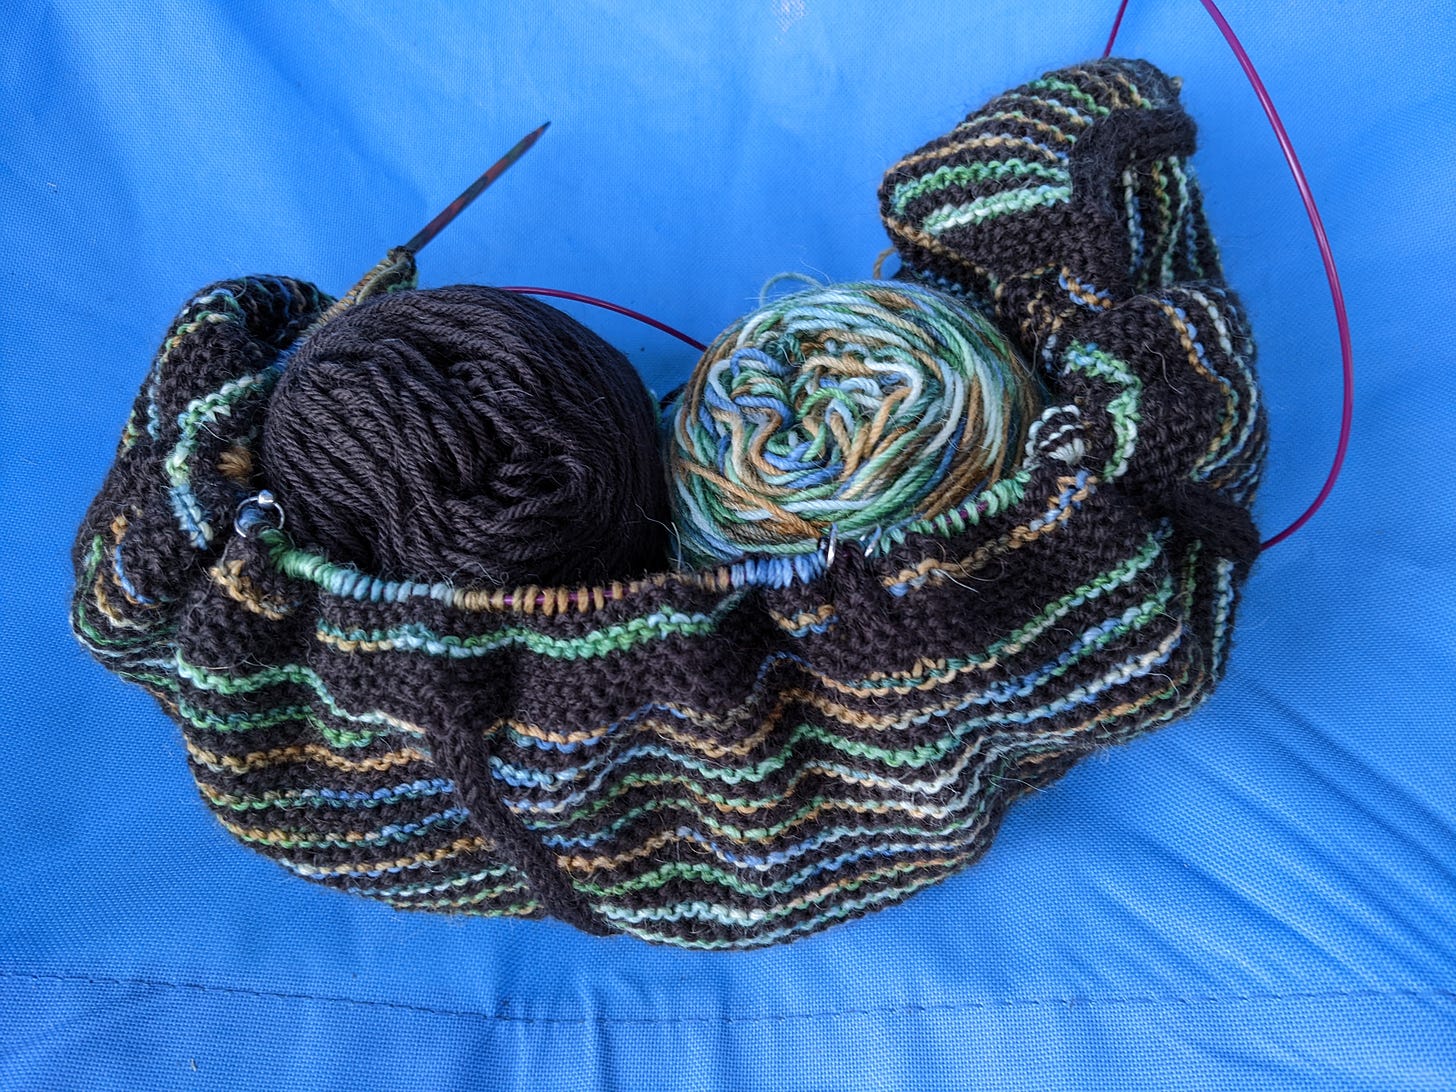 A half-knit scarf in brown and variegated yarn on a blue background